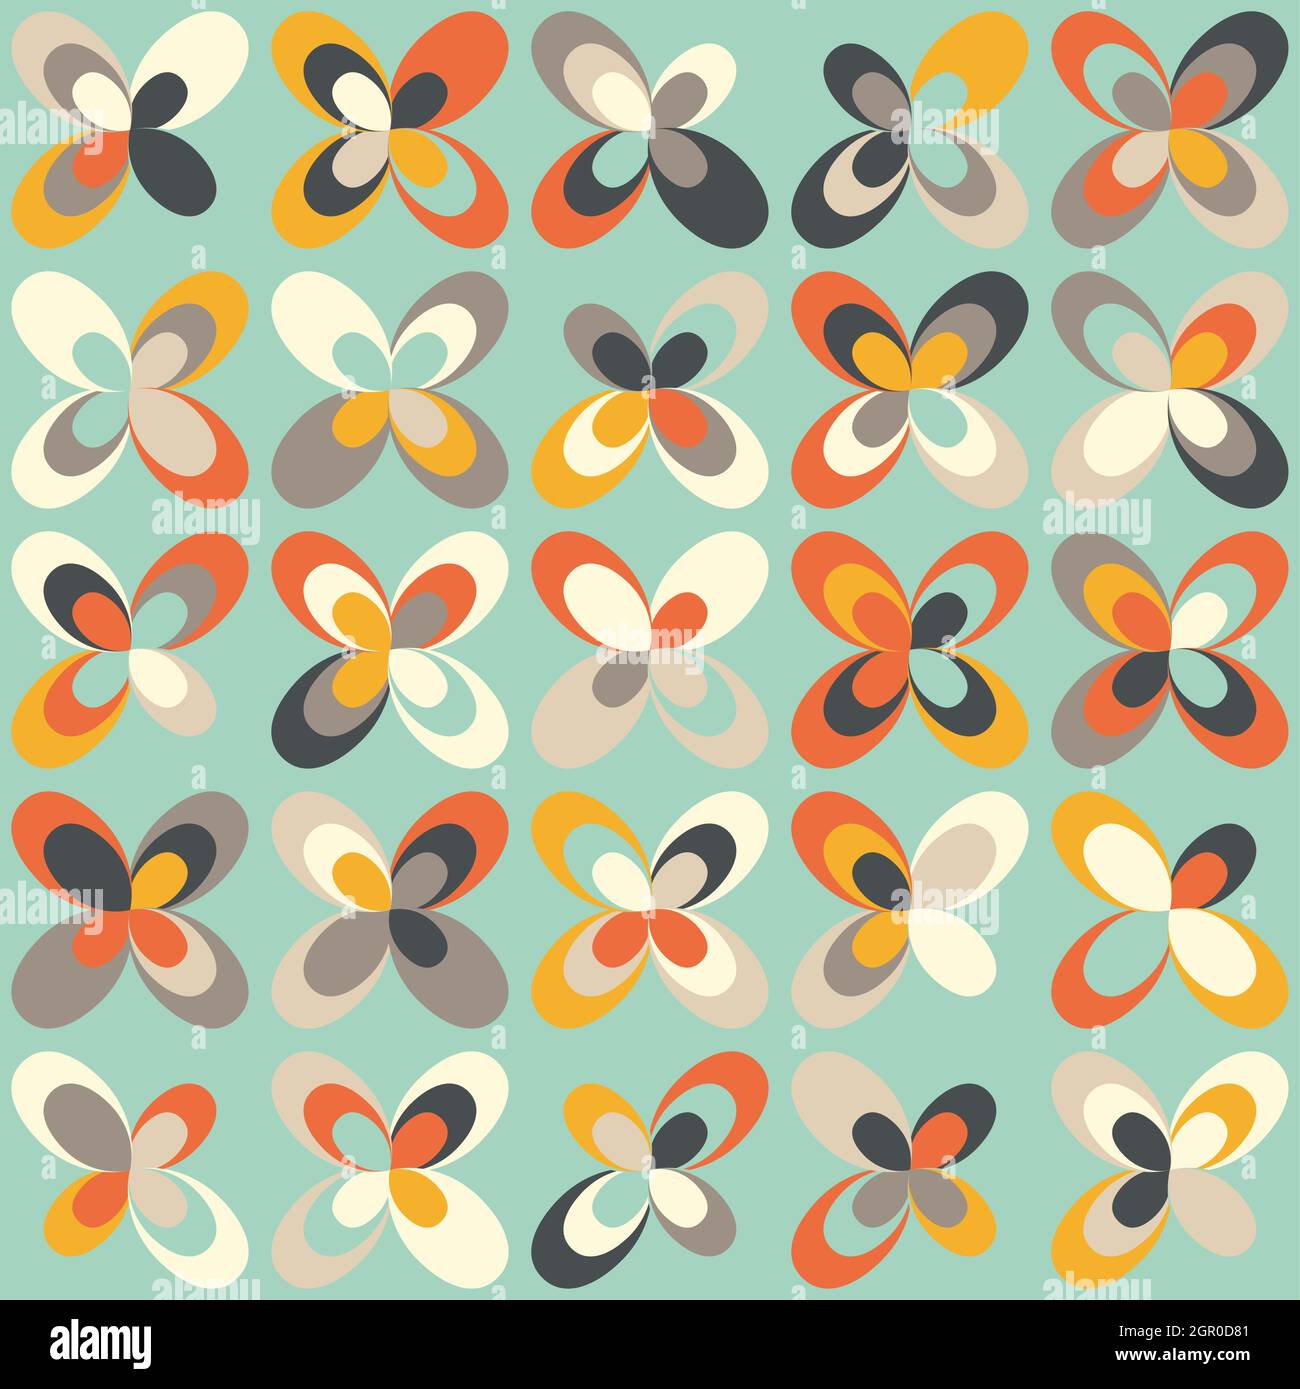 Midcentury geometric retro background. Vintage brown, orange and teal colors. Seamless floral mod pattern, vector illustration. Abstract retro geometr Stock Vector